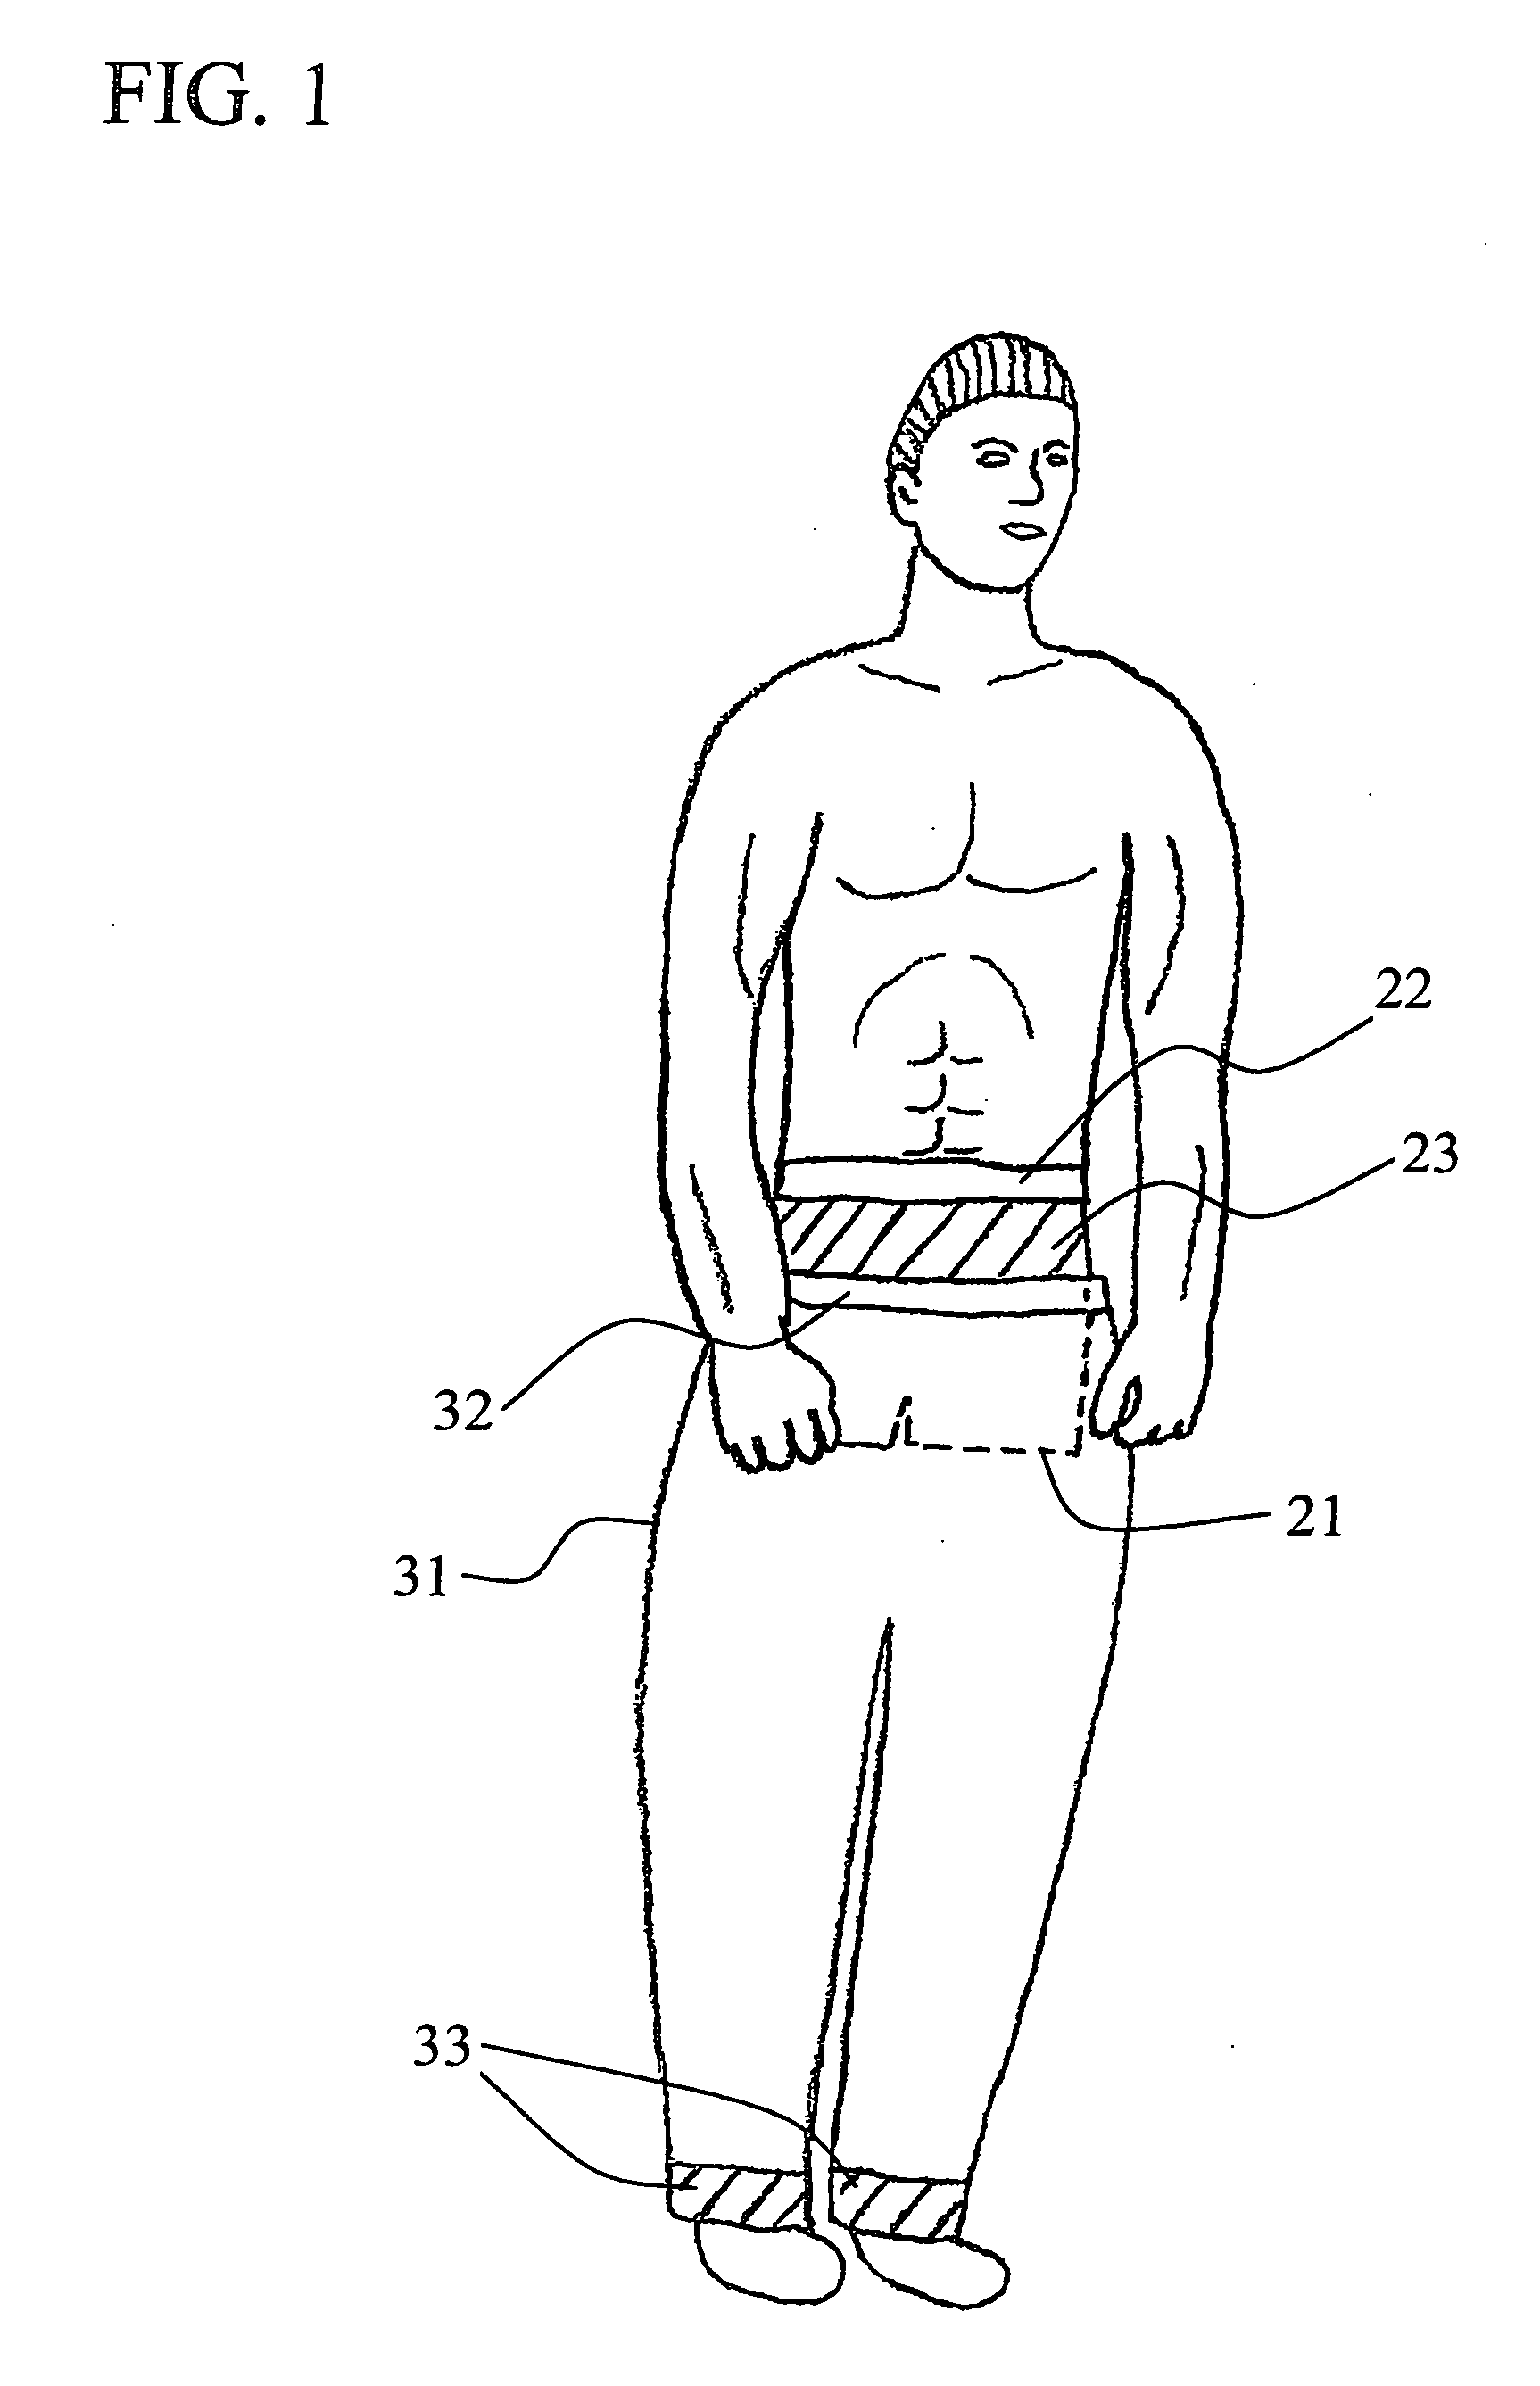 Pants construction stabilized by integral undergarment